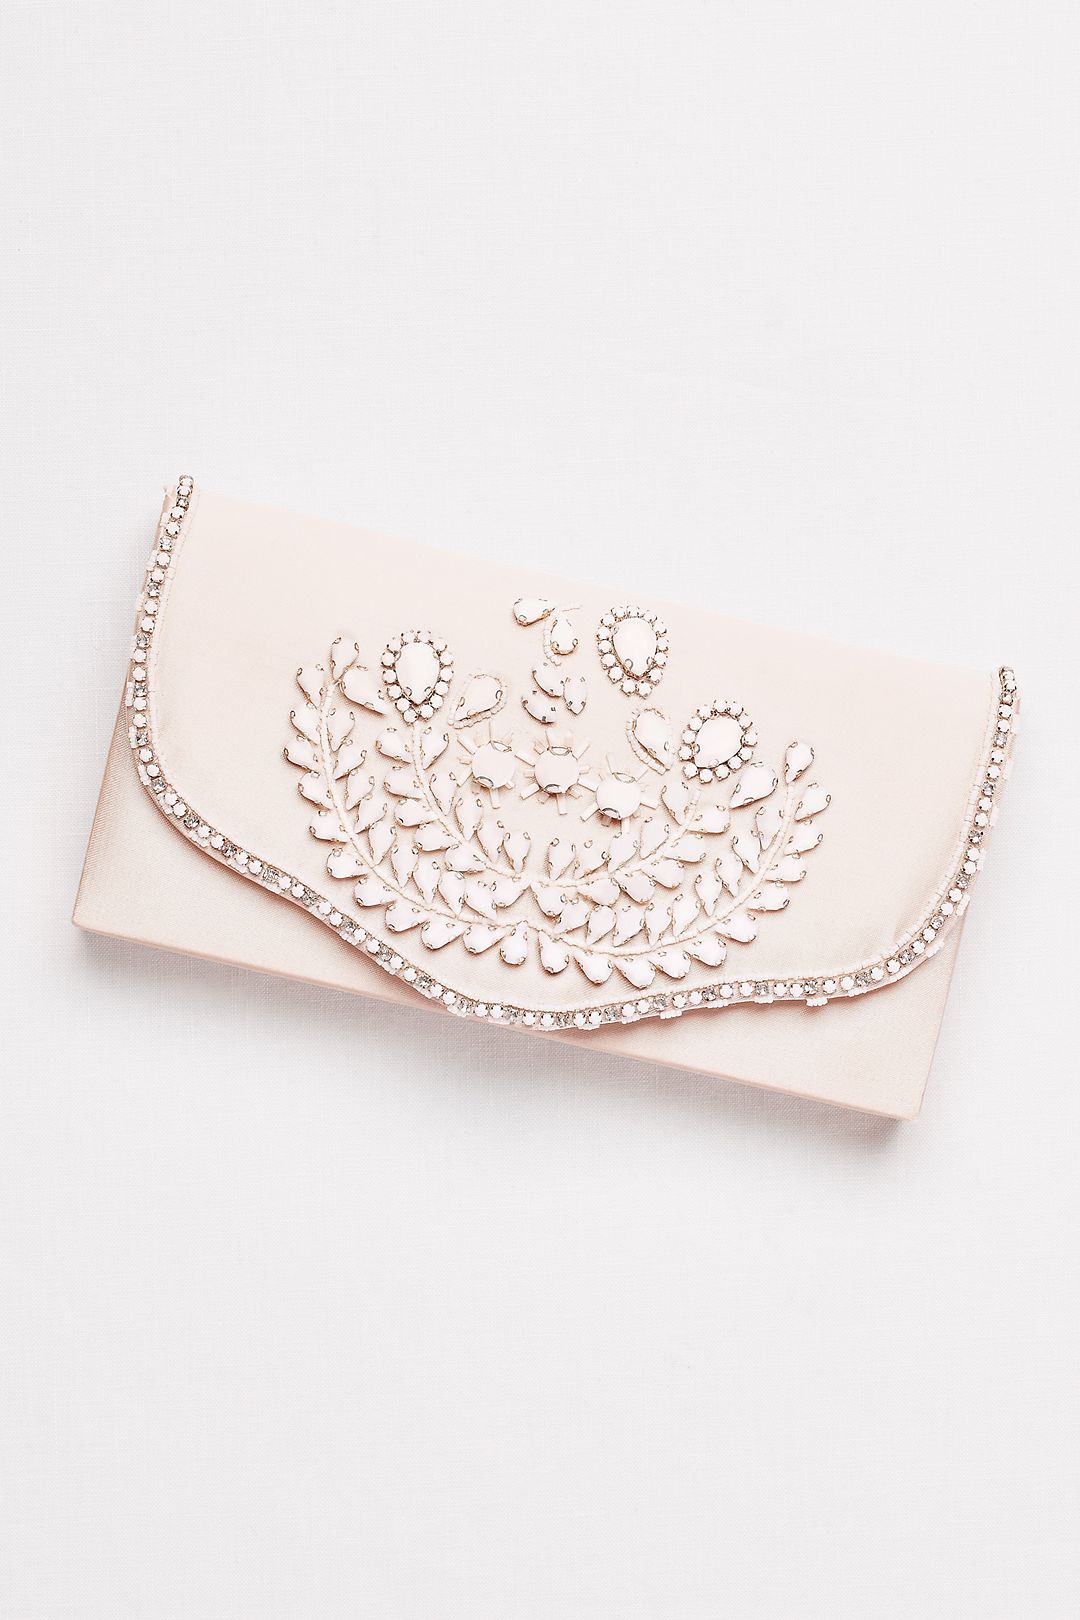 Hard-Sided Satin Clutch with White Beading Image 1